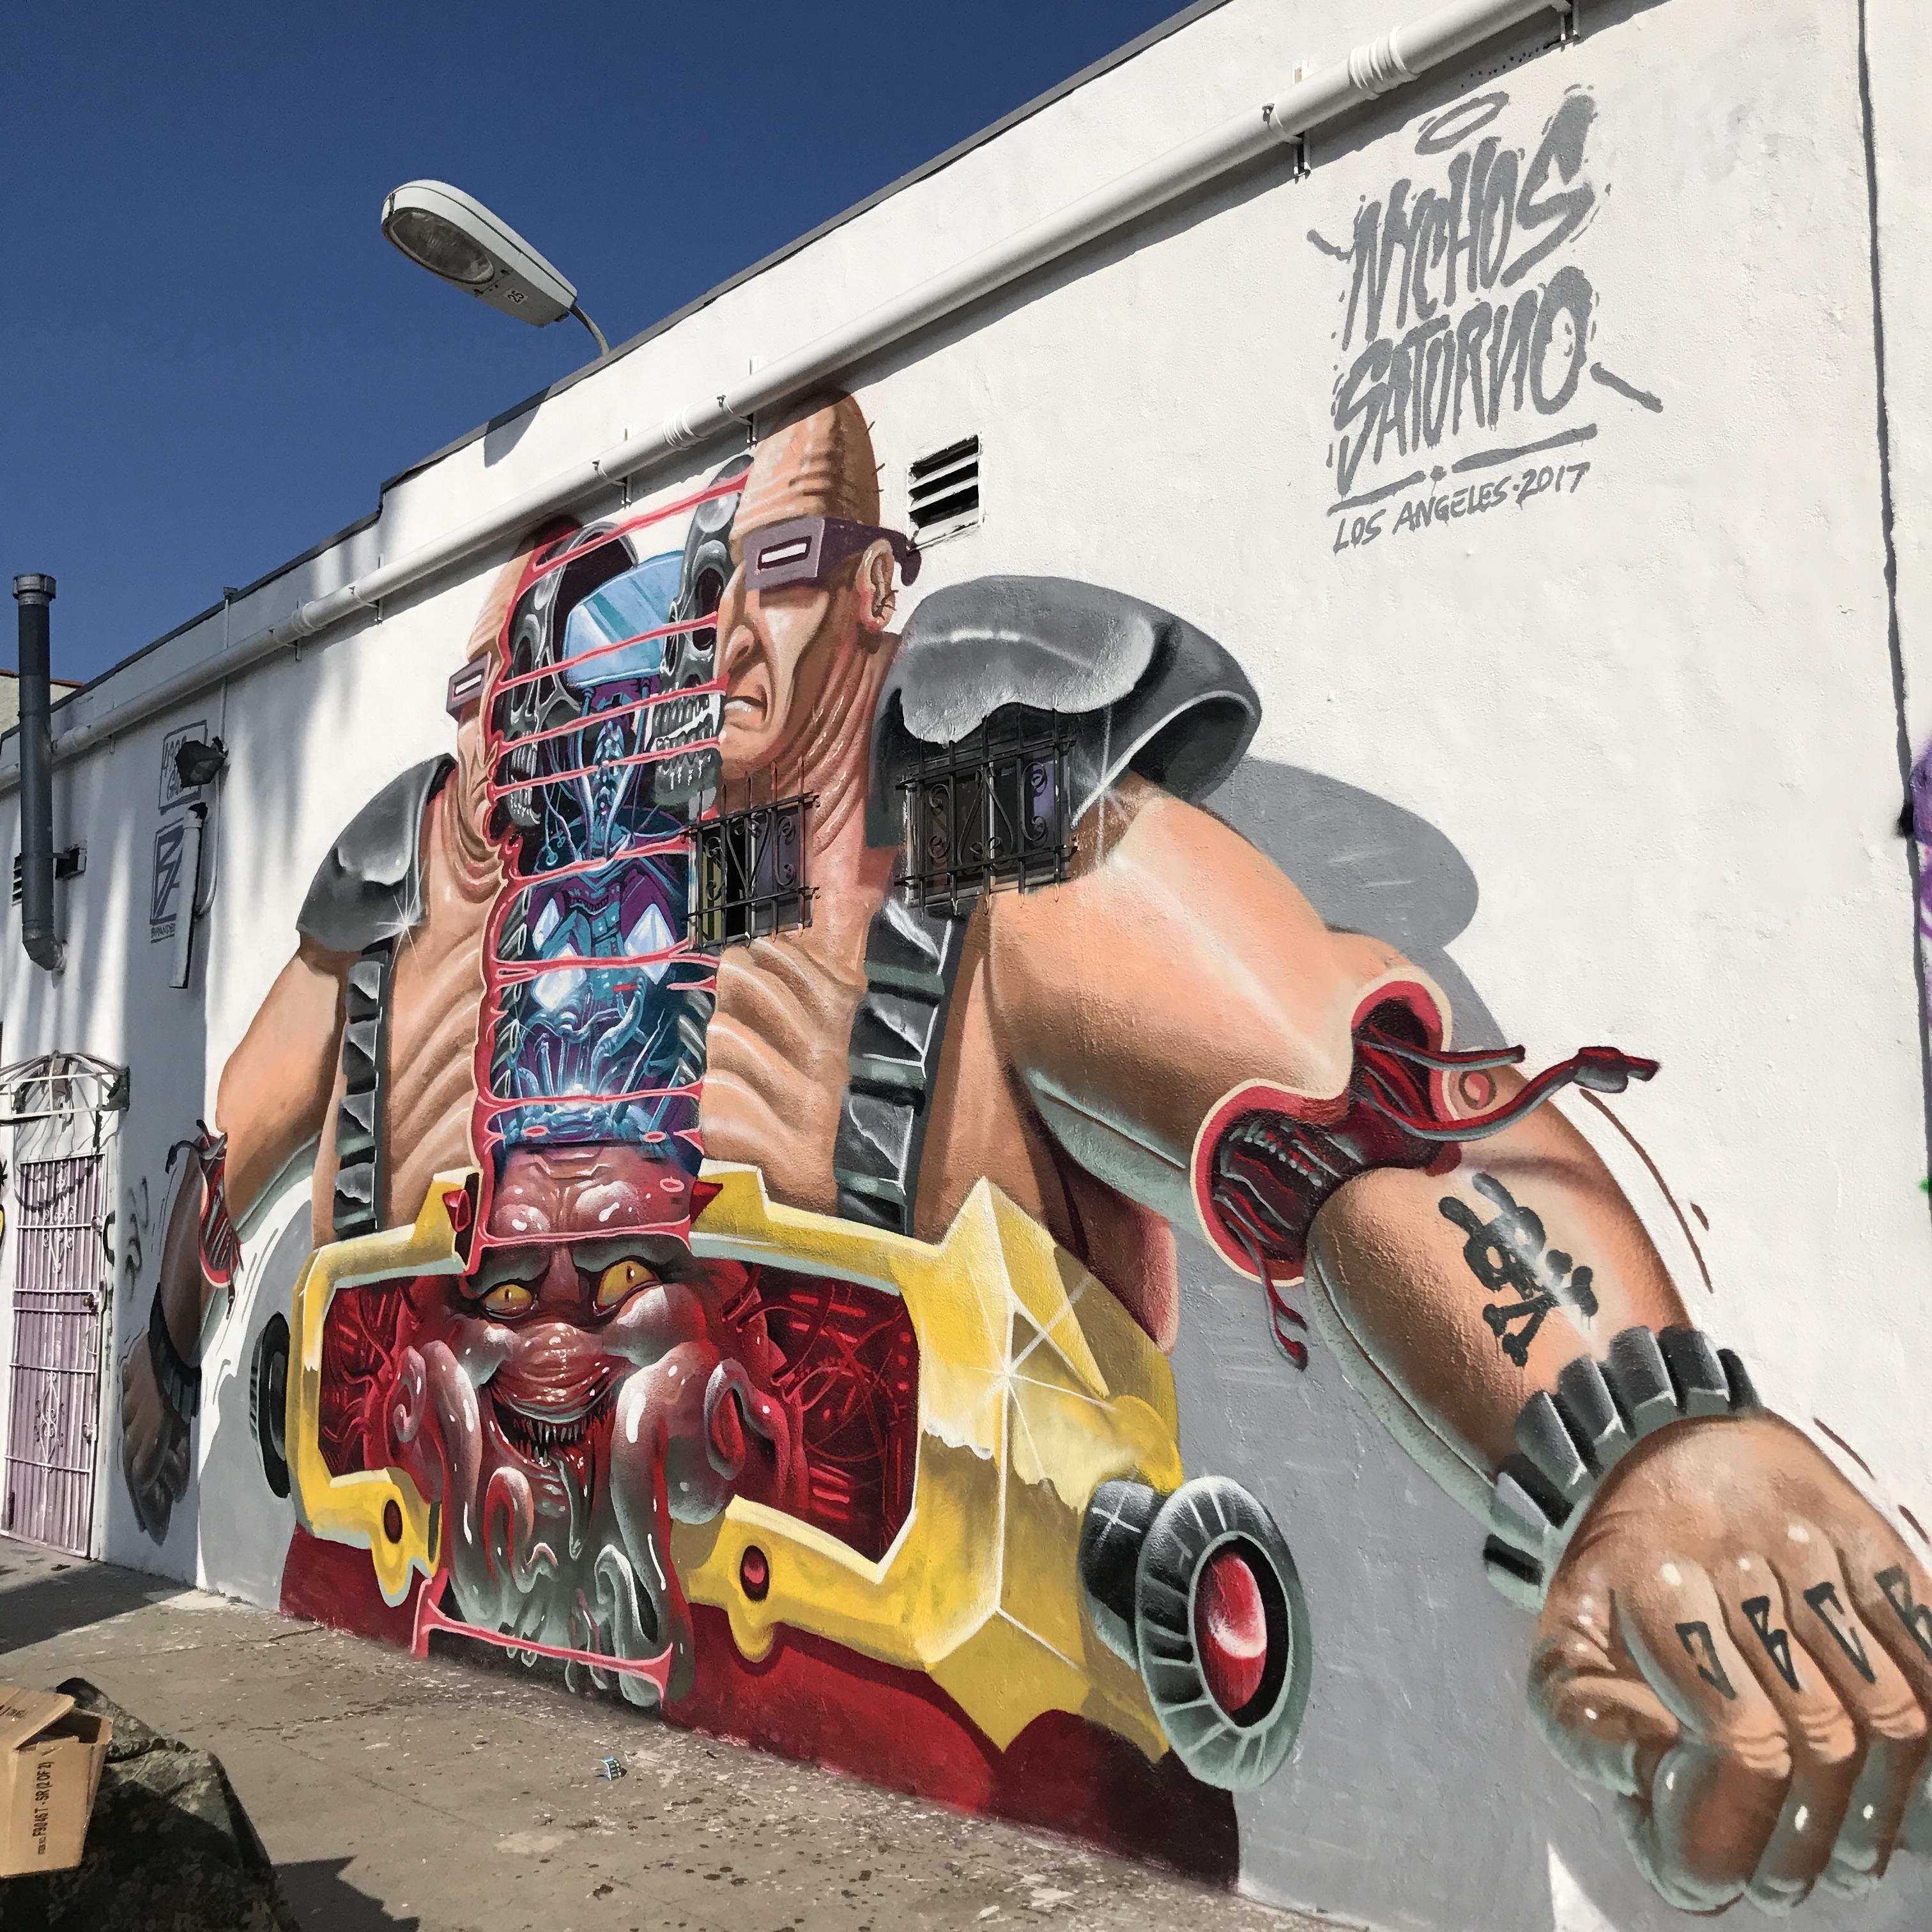 Awesome artwork of cyborg on a side of a truck